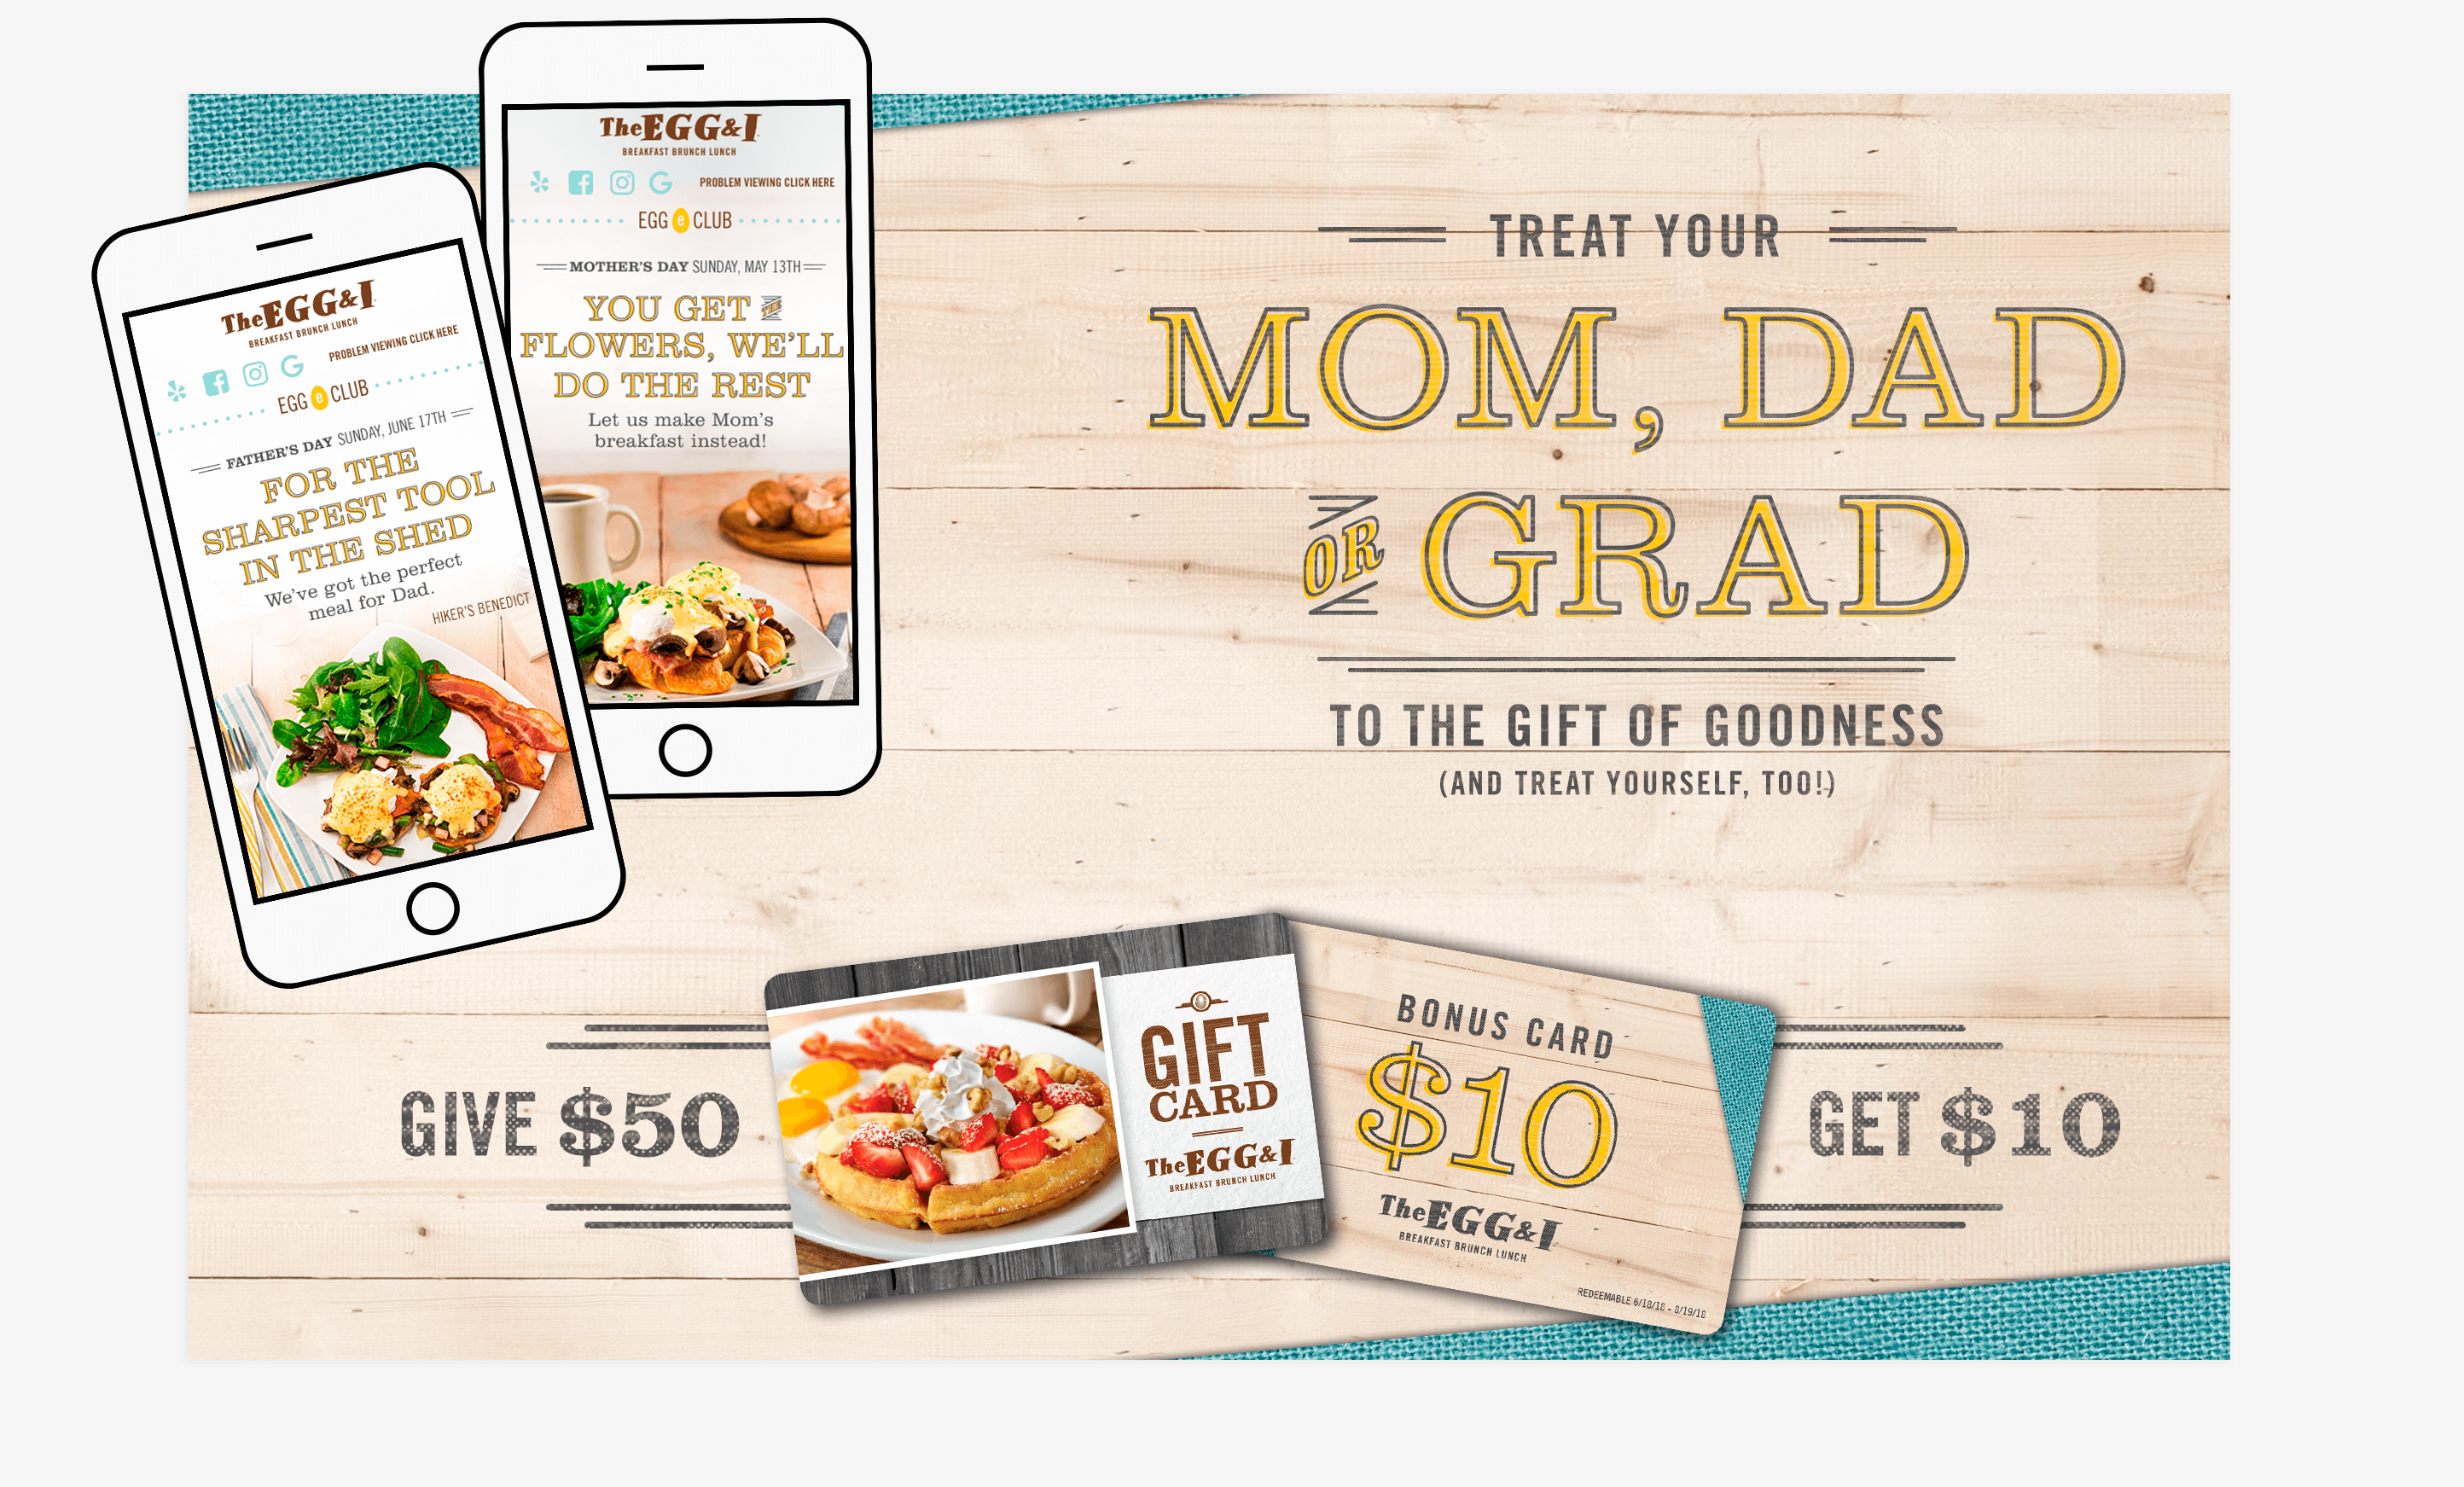 Mom, Dad & Grad campaign design including menus, table cards, posters, digital and photography for The Egg and I restaurant 2018